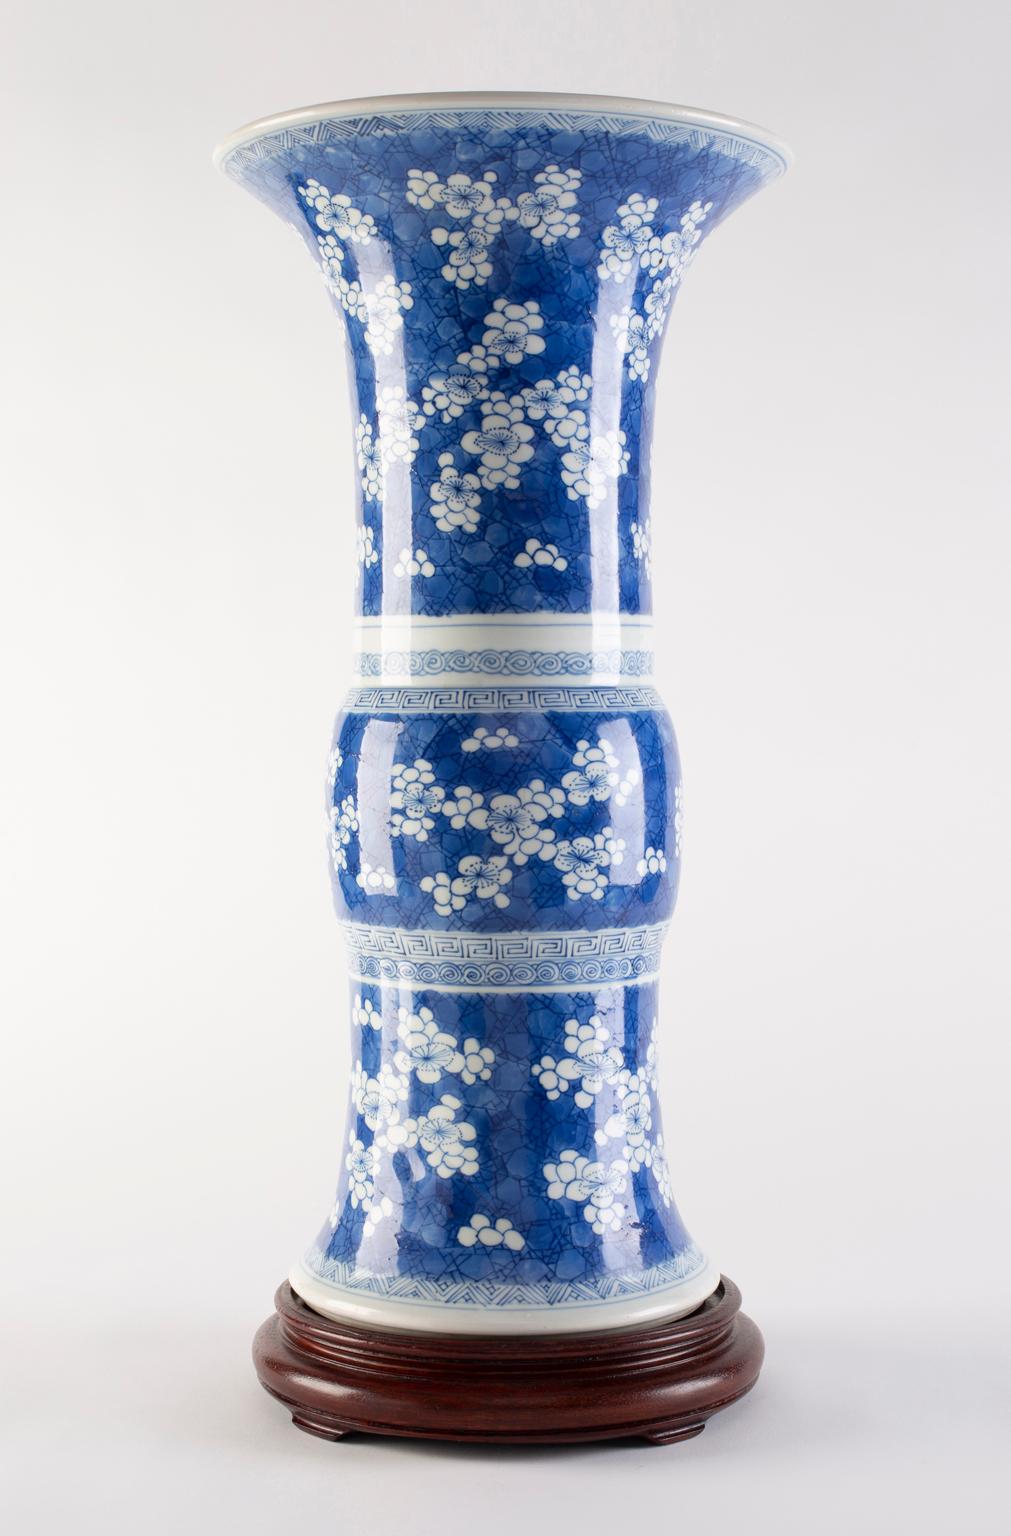 Provenance: a Park Avenue collection

Chinese Kangxi Period blue and white glazed porcelain vase, Gu decorated with blossoming white prunus on a 'cracked ice' ground.